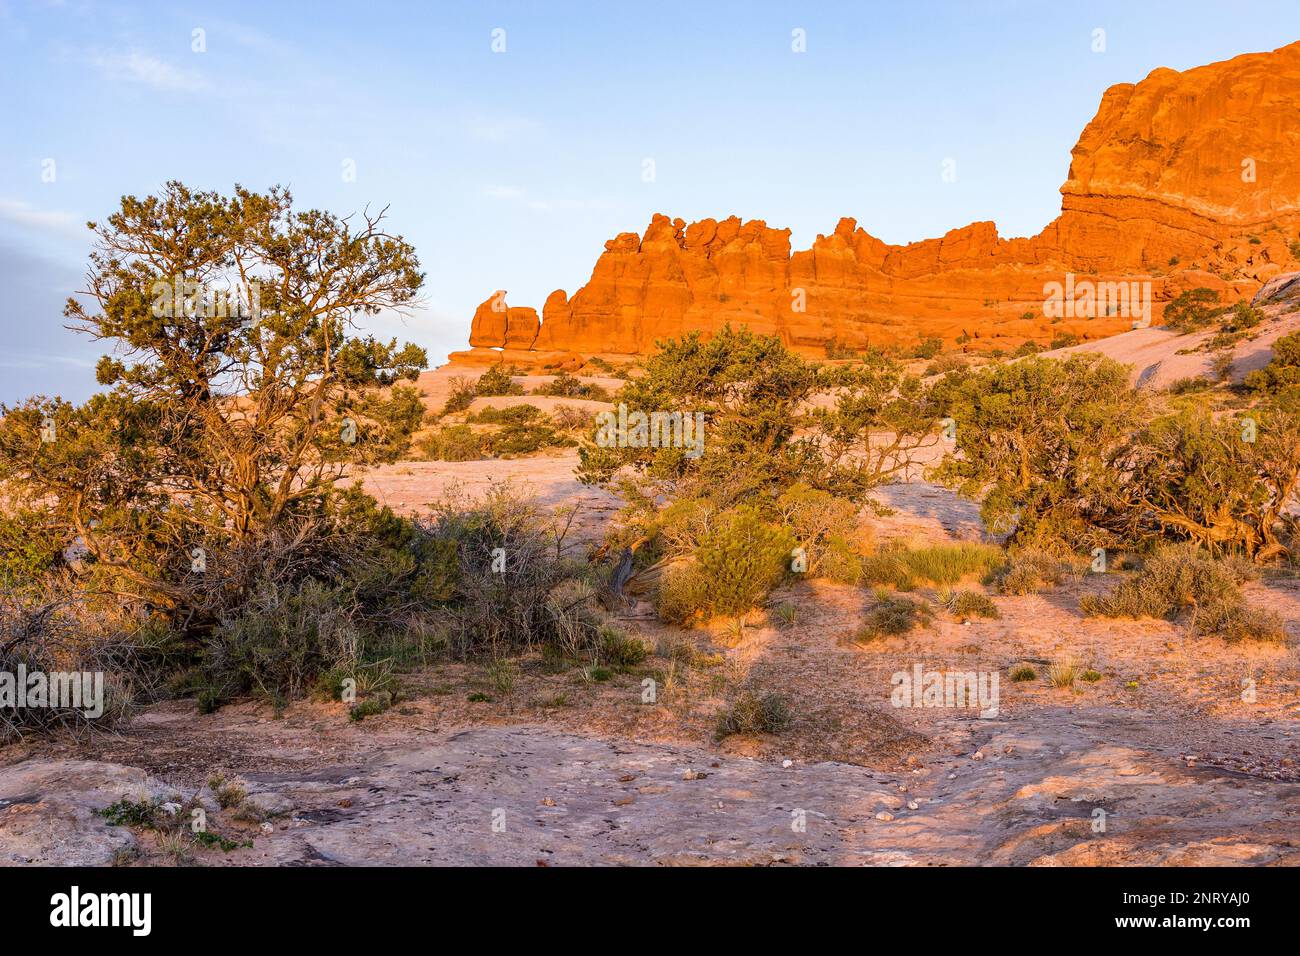 The Entrada sandstone formations of the Navajo Rocks at sunrise near Moab, Utah.  In front are pinyon pine and Utah juniper trees. Stock Photo